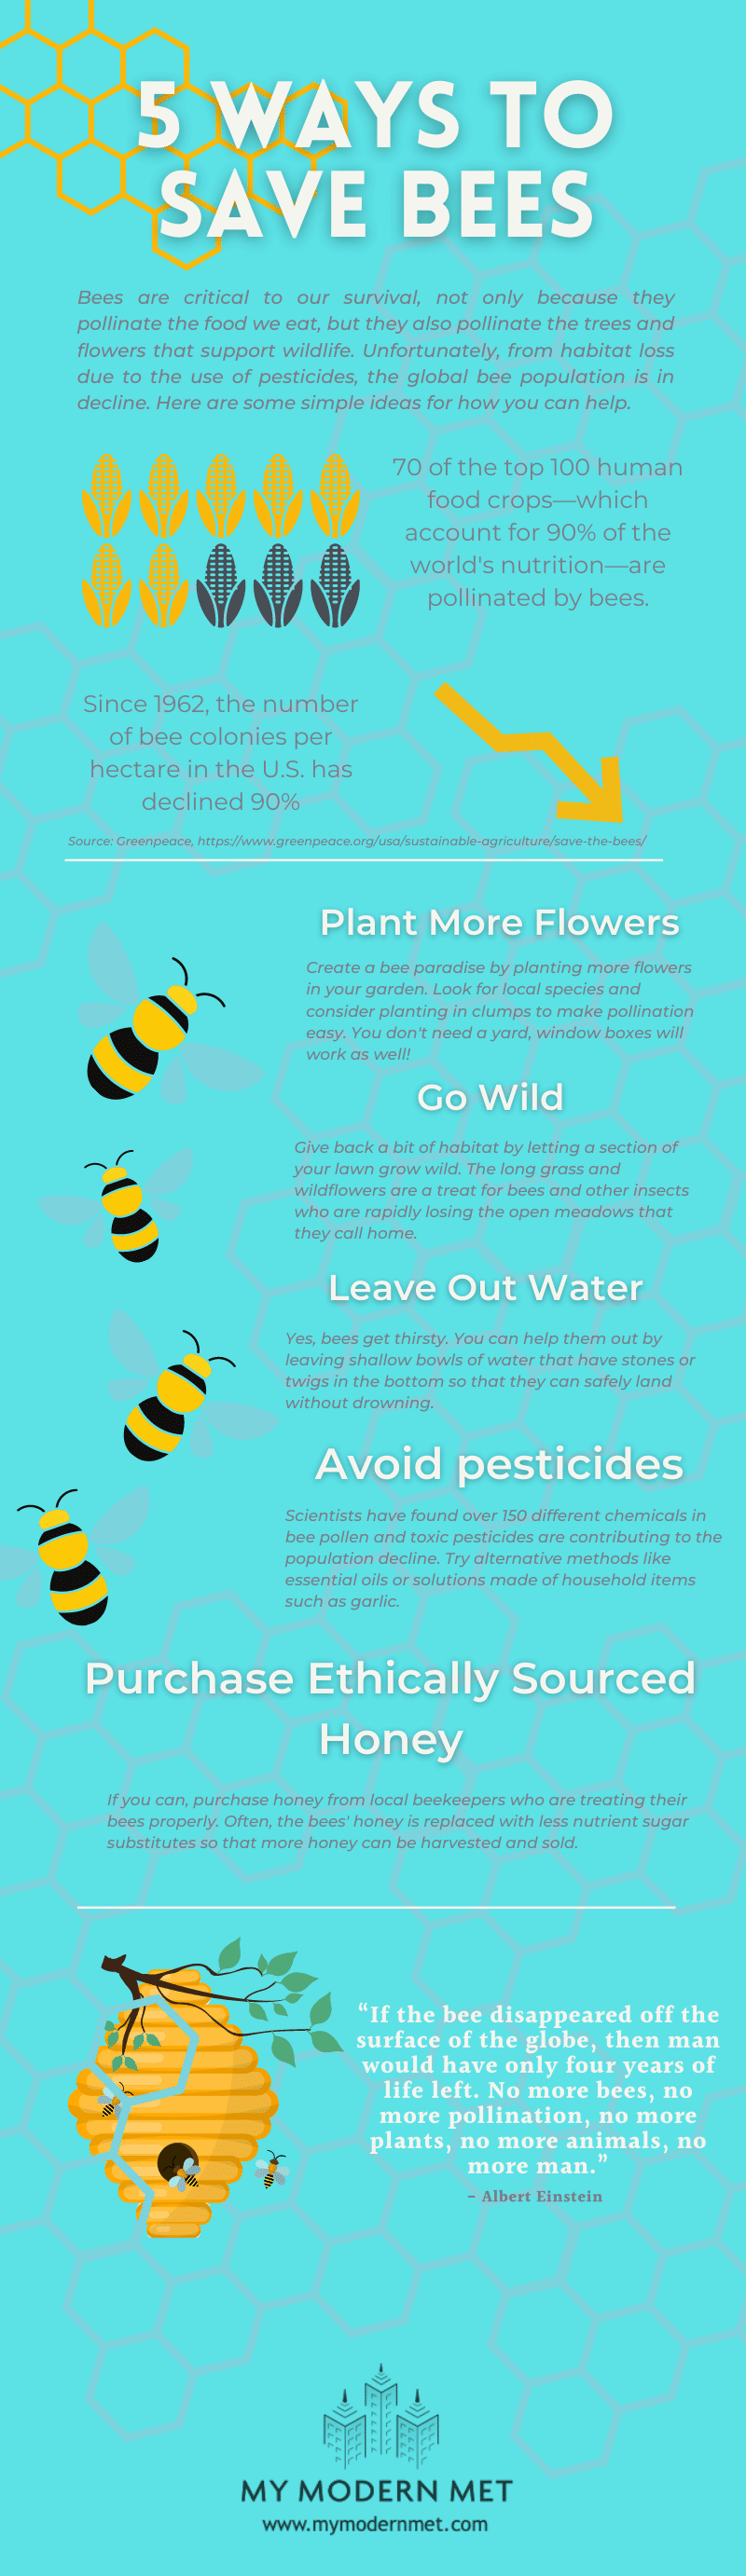 Save the Bees Infographic